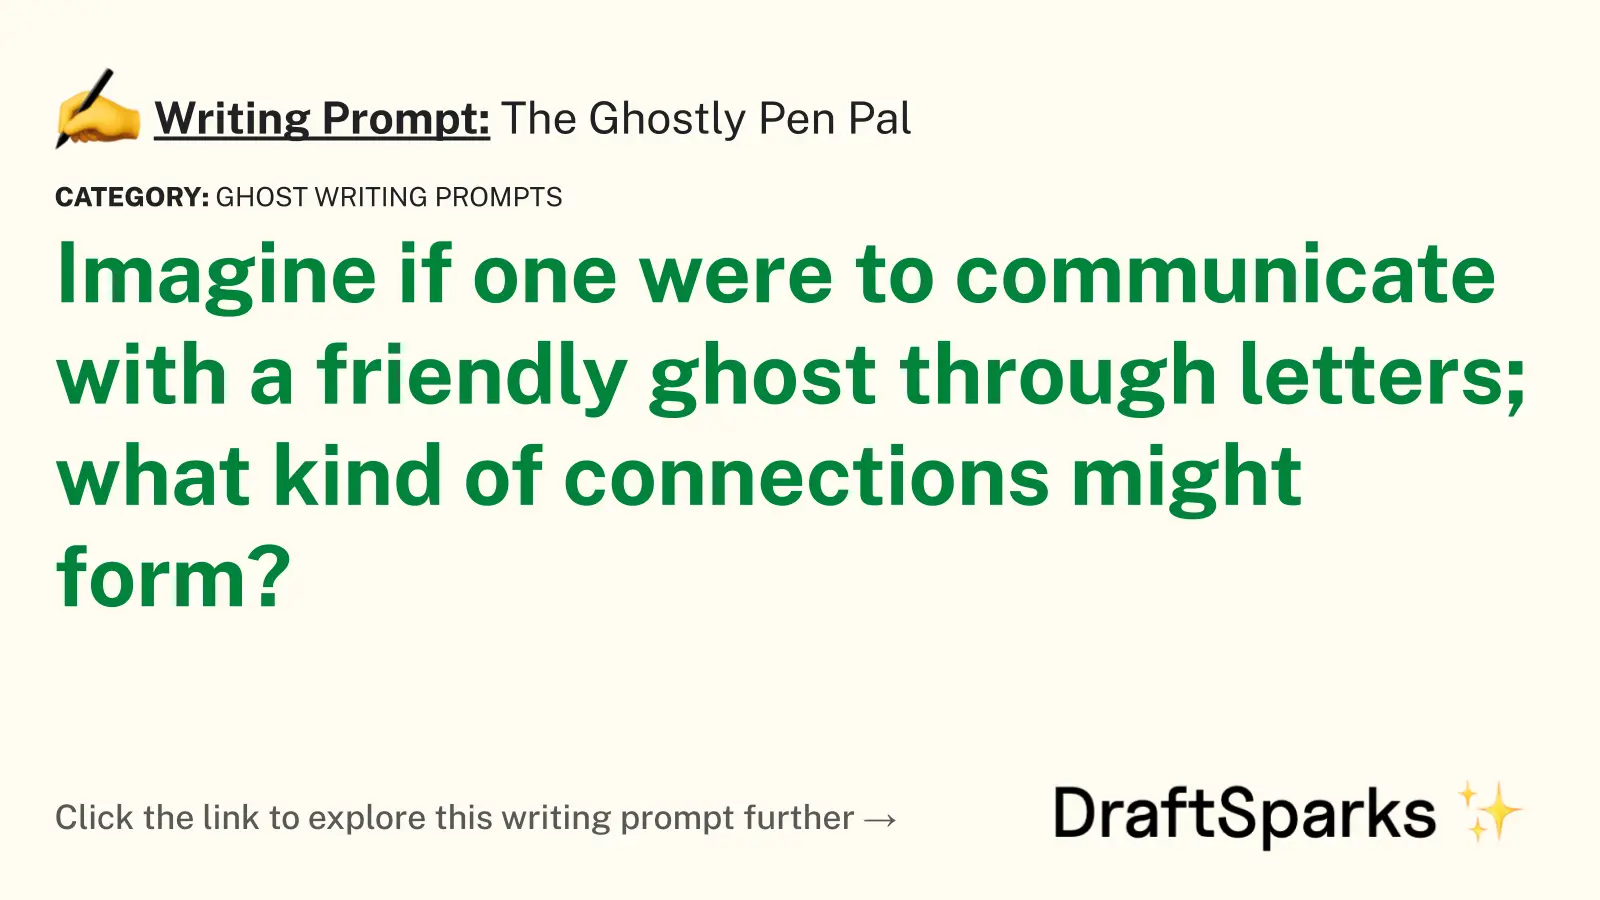 The Ghostly Pen Pal